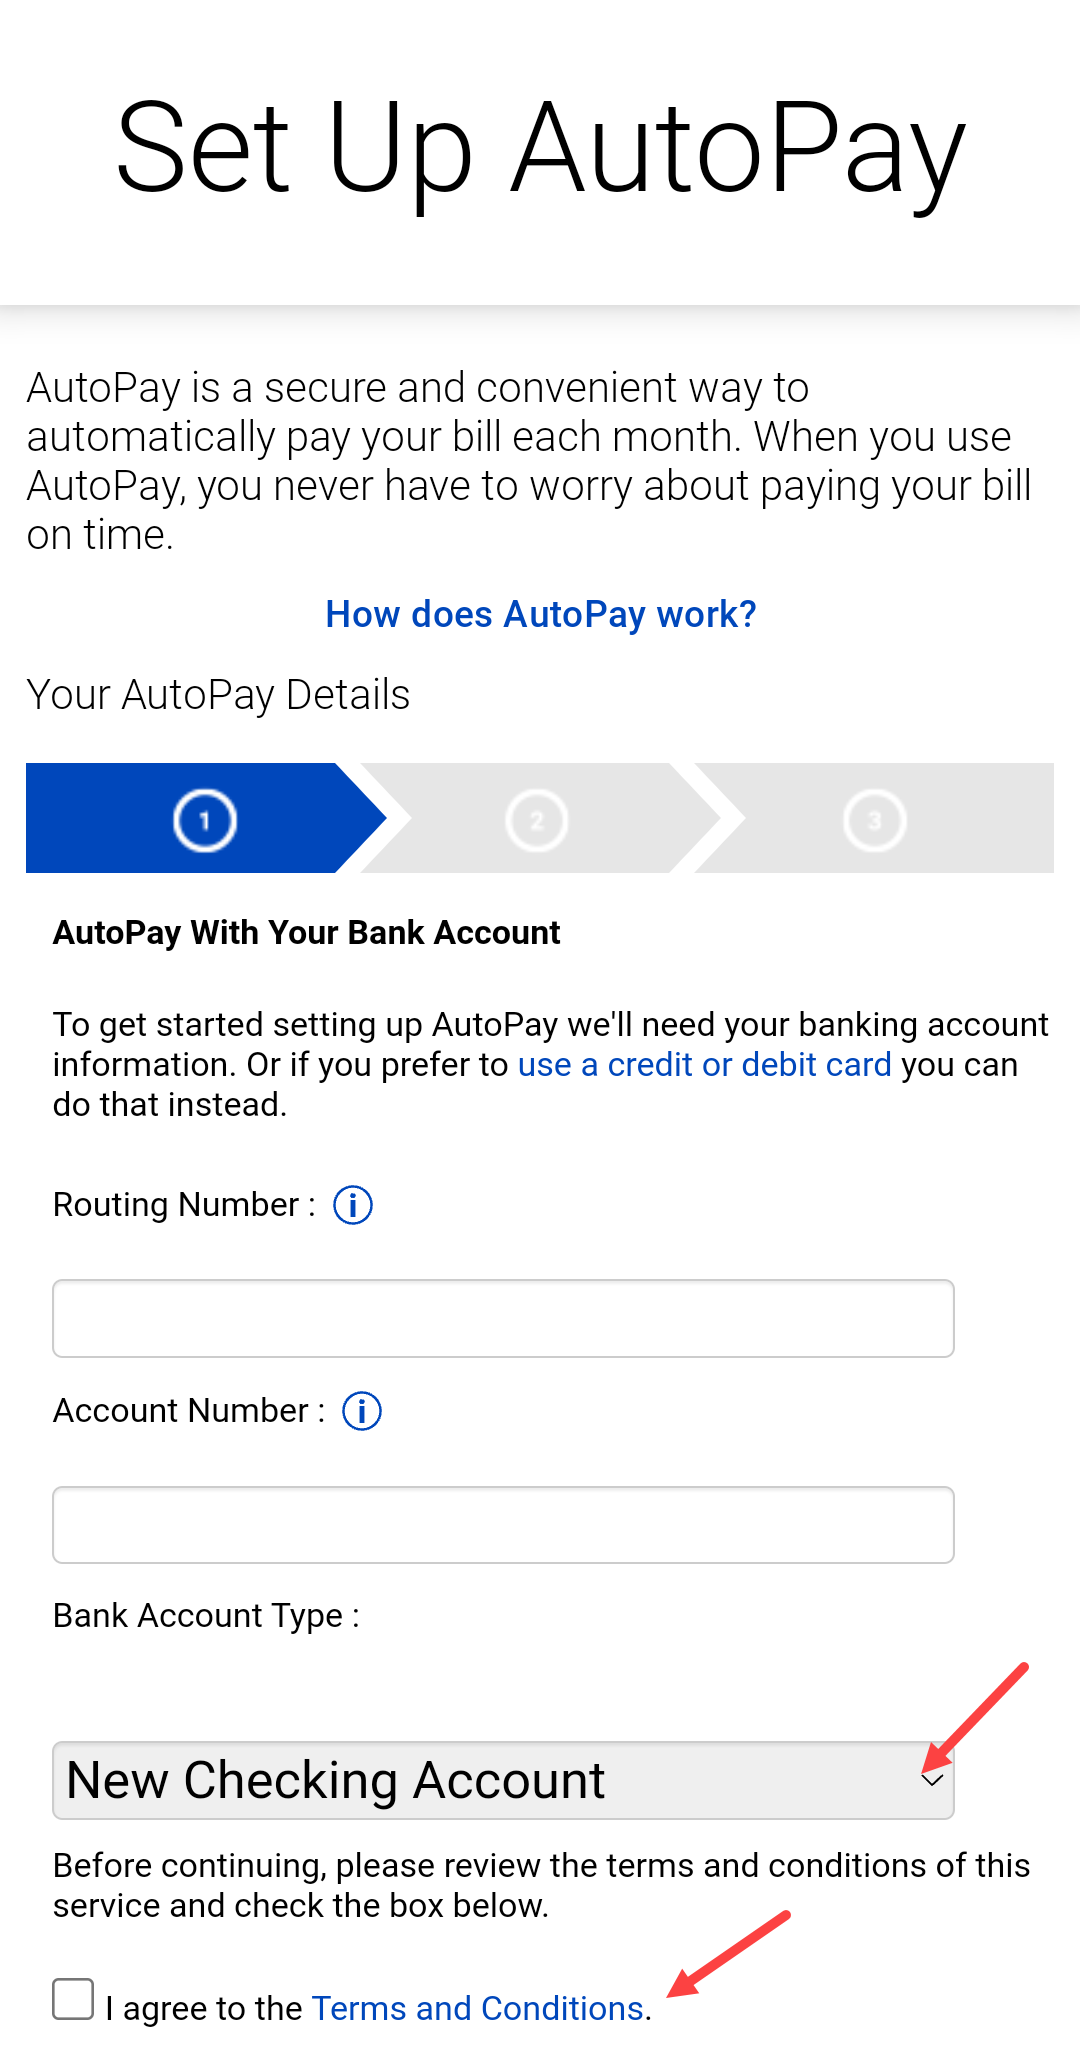 How to Enroll in AutoPay CenturyLink